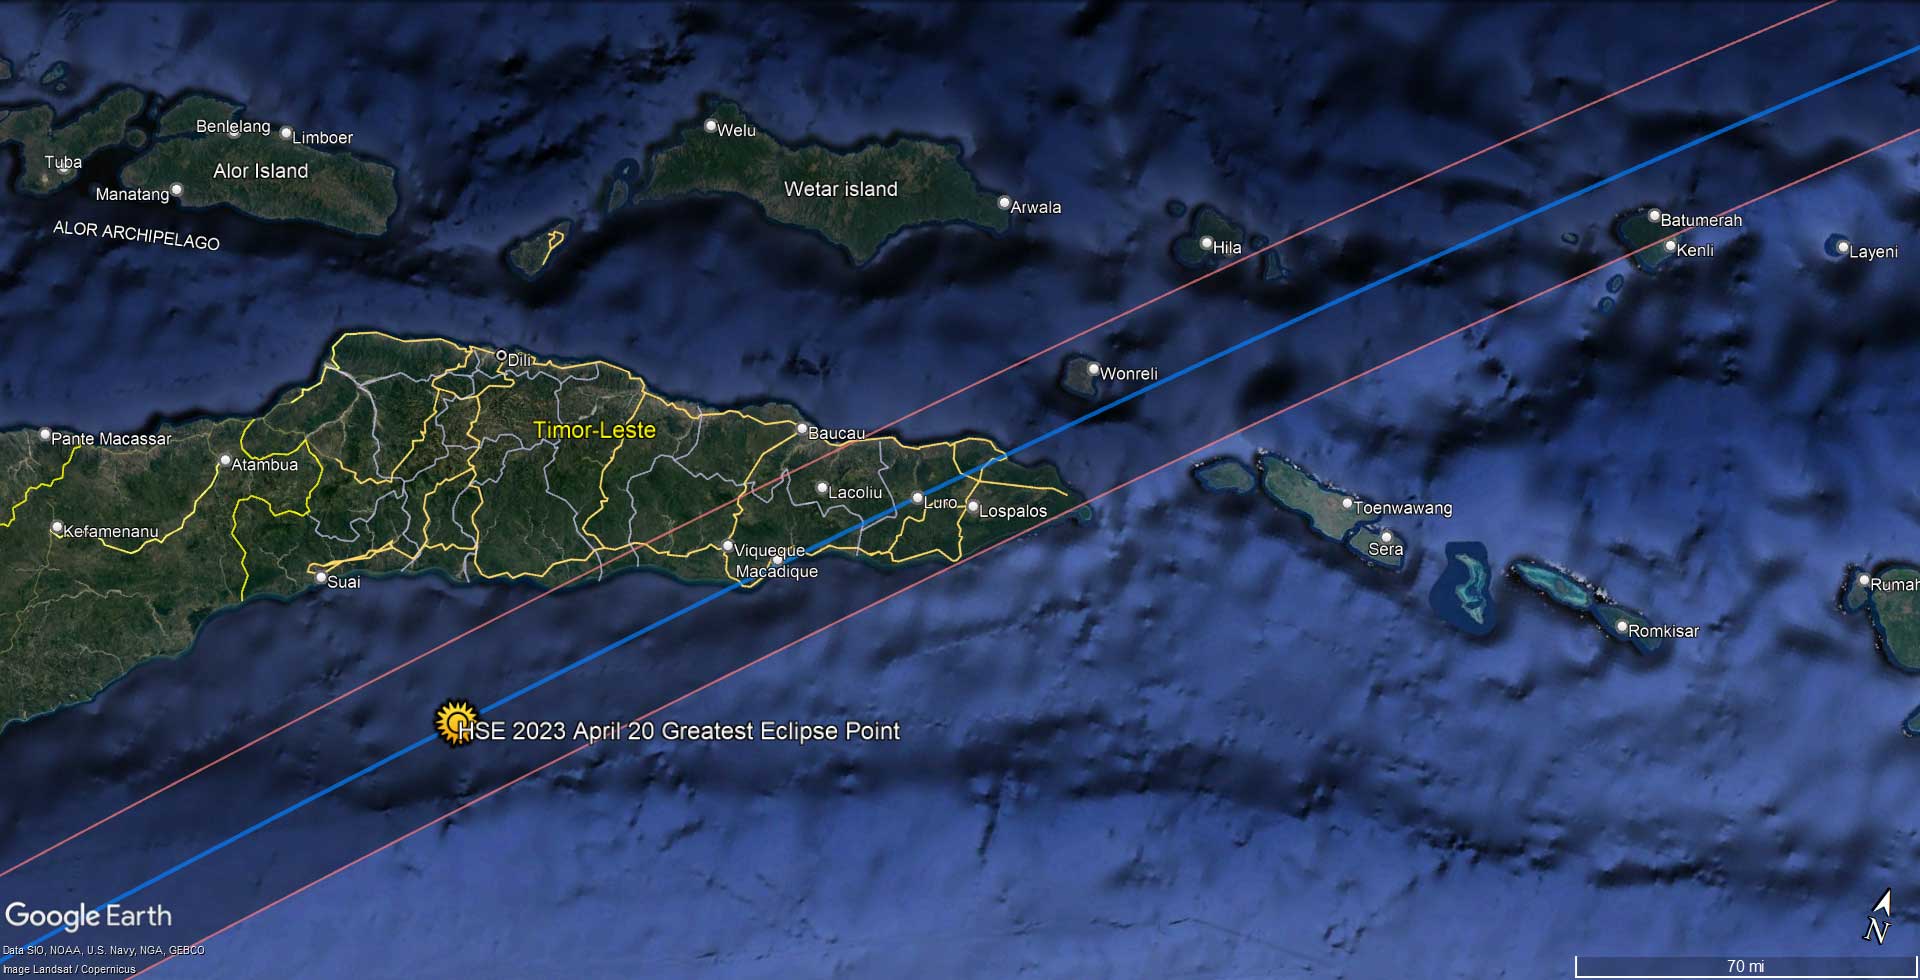 Totality strip of the Solar Eclipse of April 20 2023 across Timor-Leste. The totality area is included between the two red lines and it is approximately 49 kilometers wide. The blue line represents the line where the central eclipse will be visible (longest totality duration).